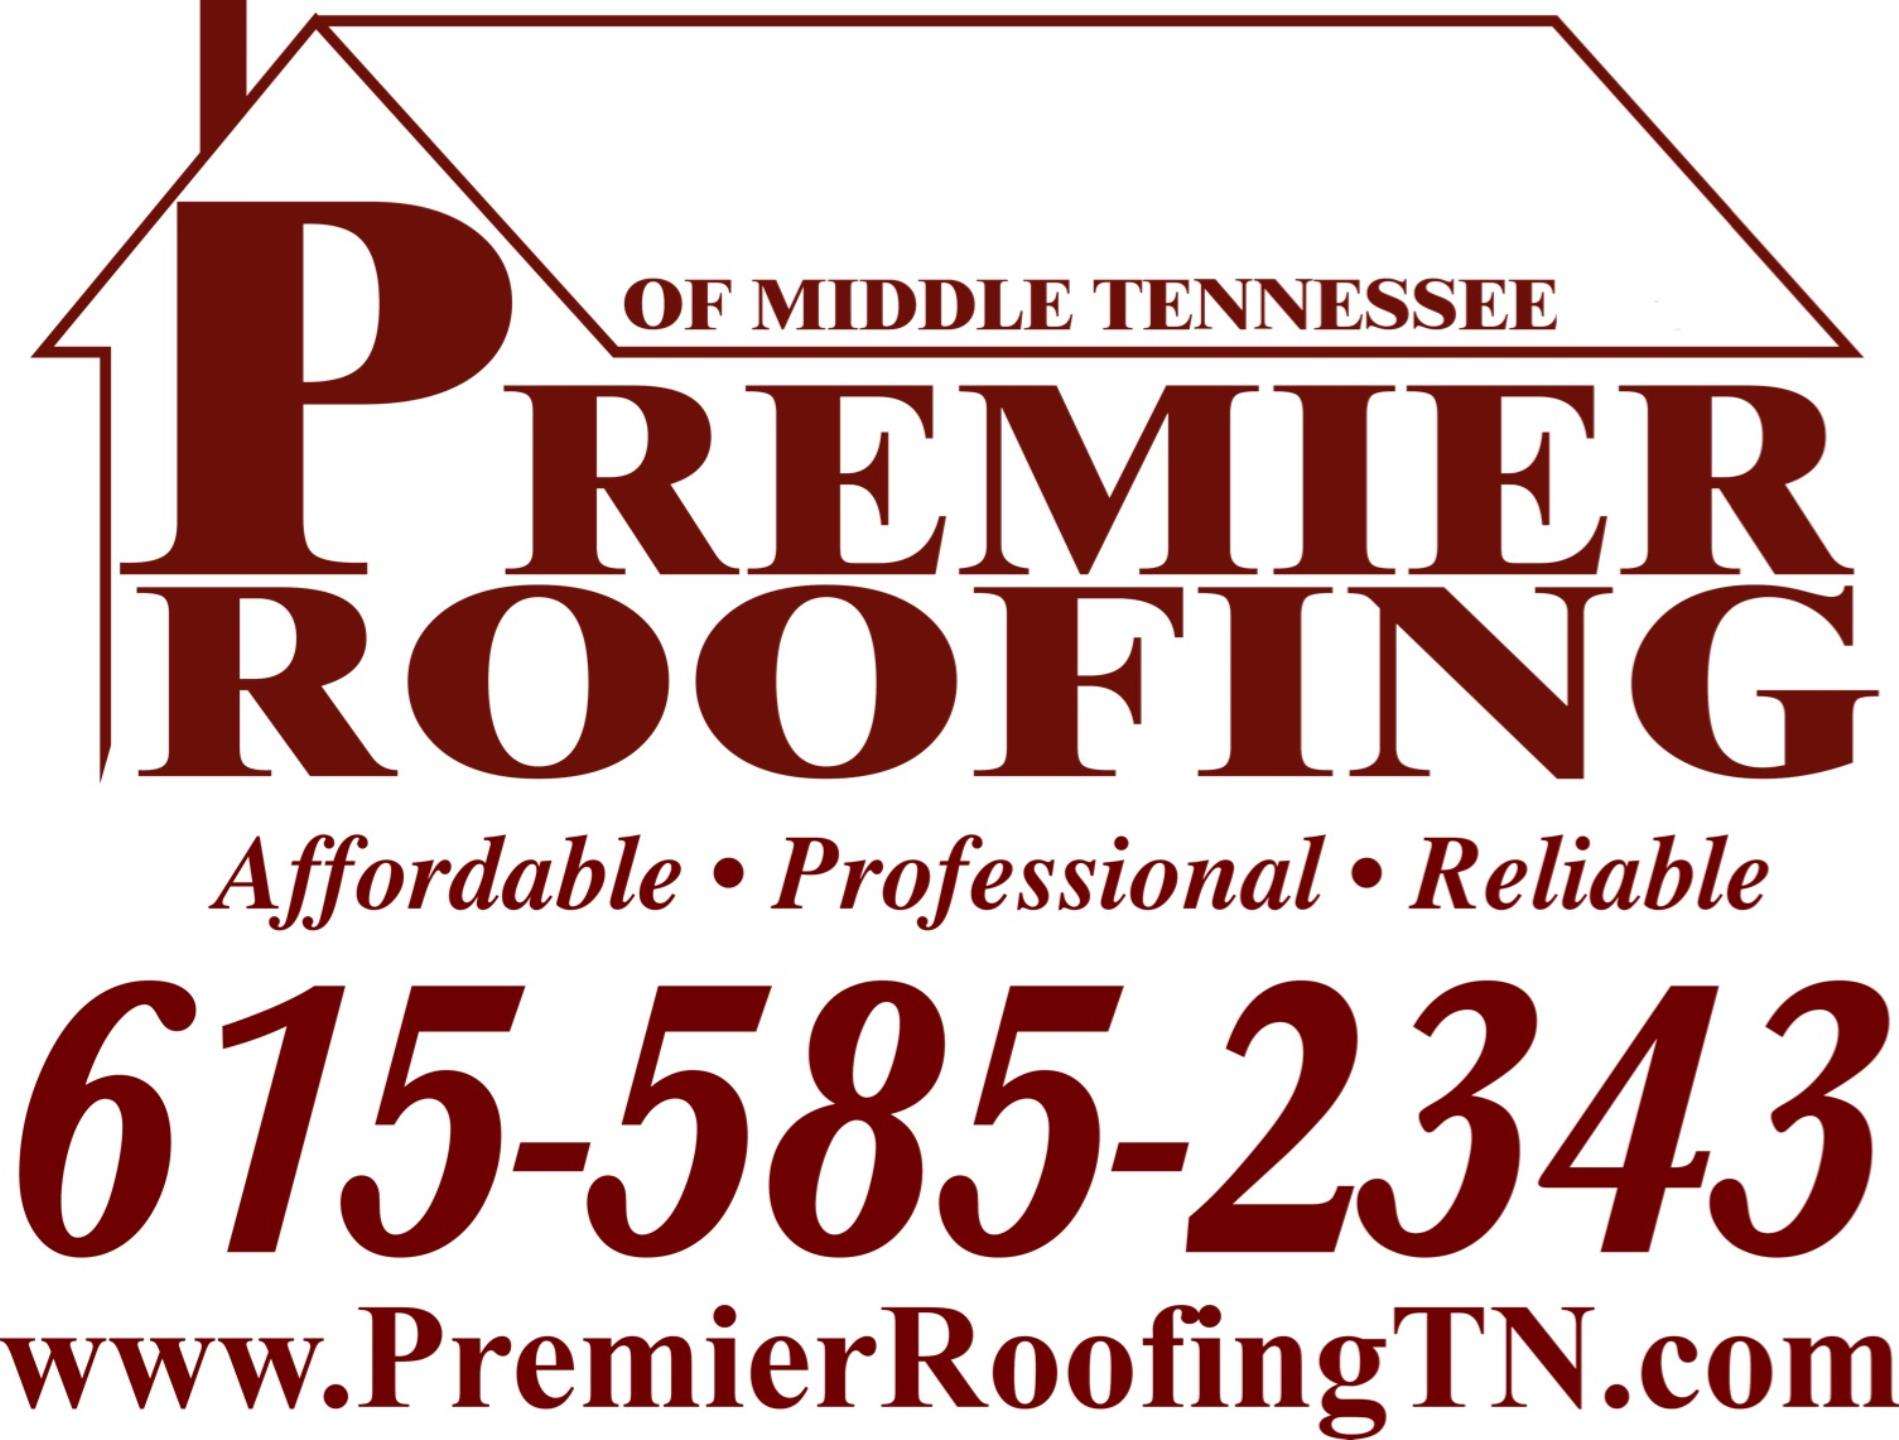 Premier Roofing of Middle Tennessee Logo